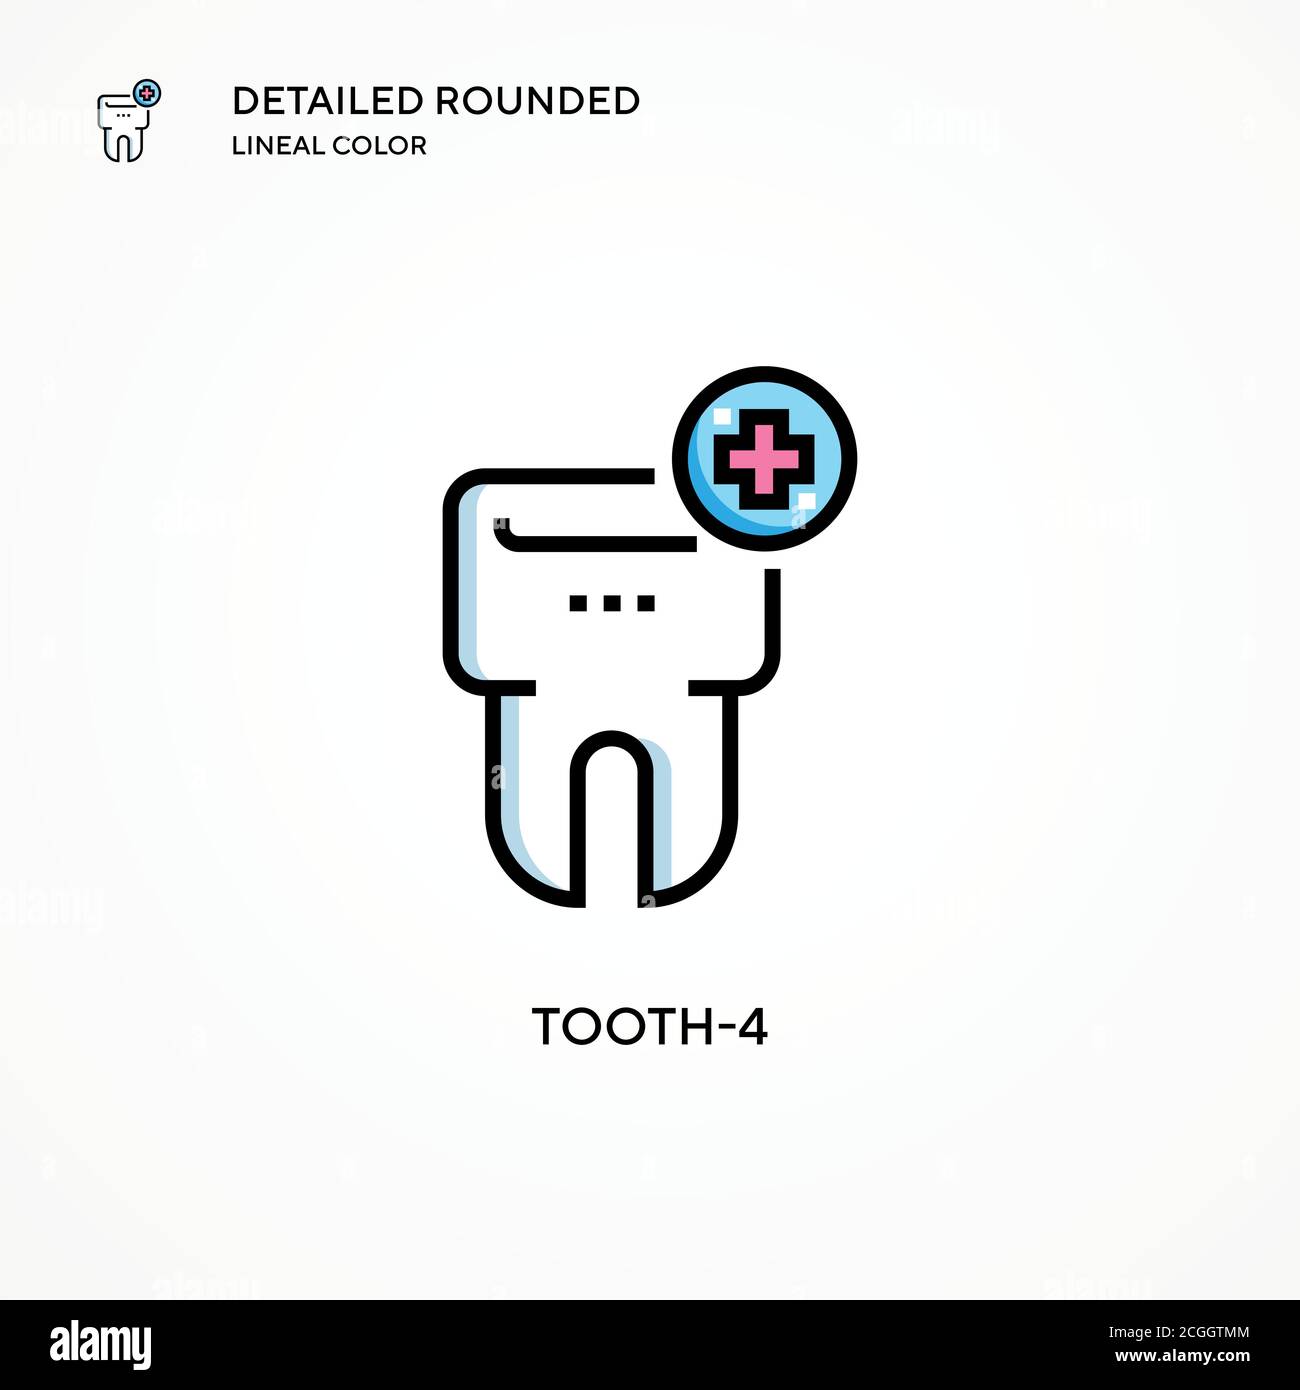 Tooth-4 vector icon. Modern vector illustration concepts. Easy to edit and customize. Stock Vector